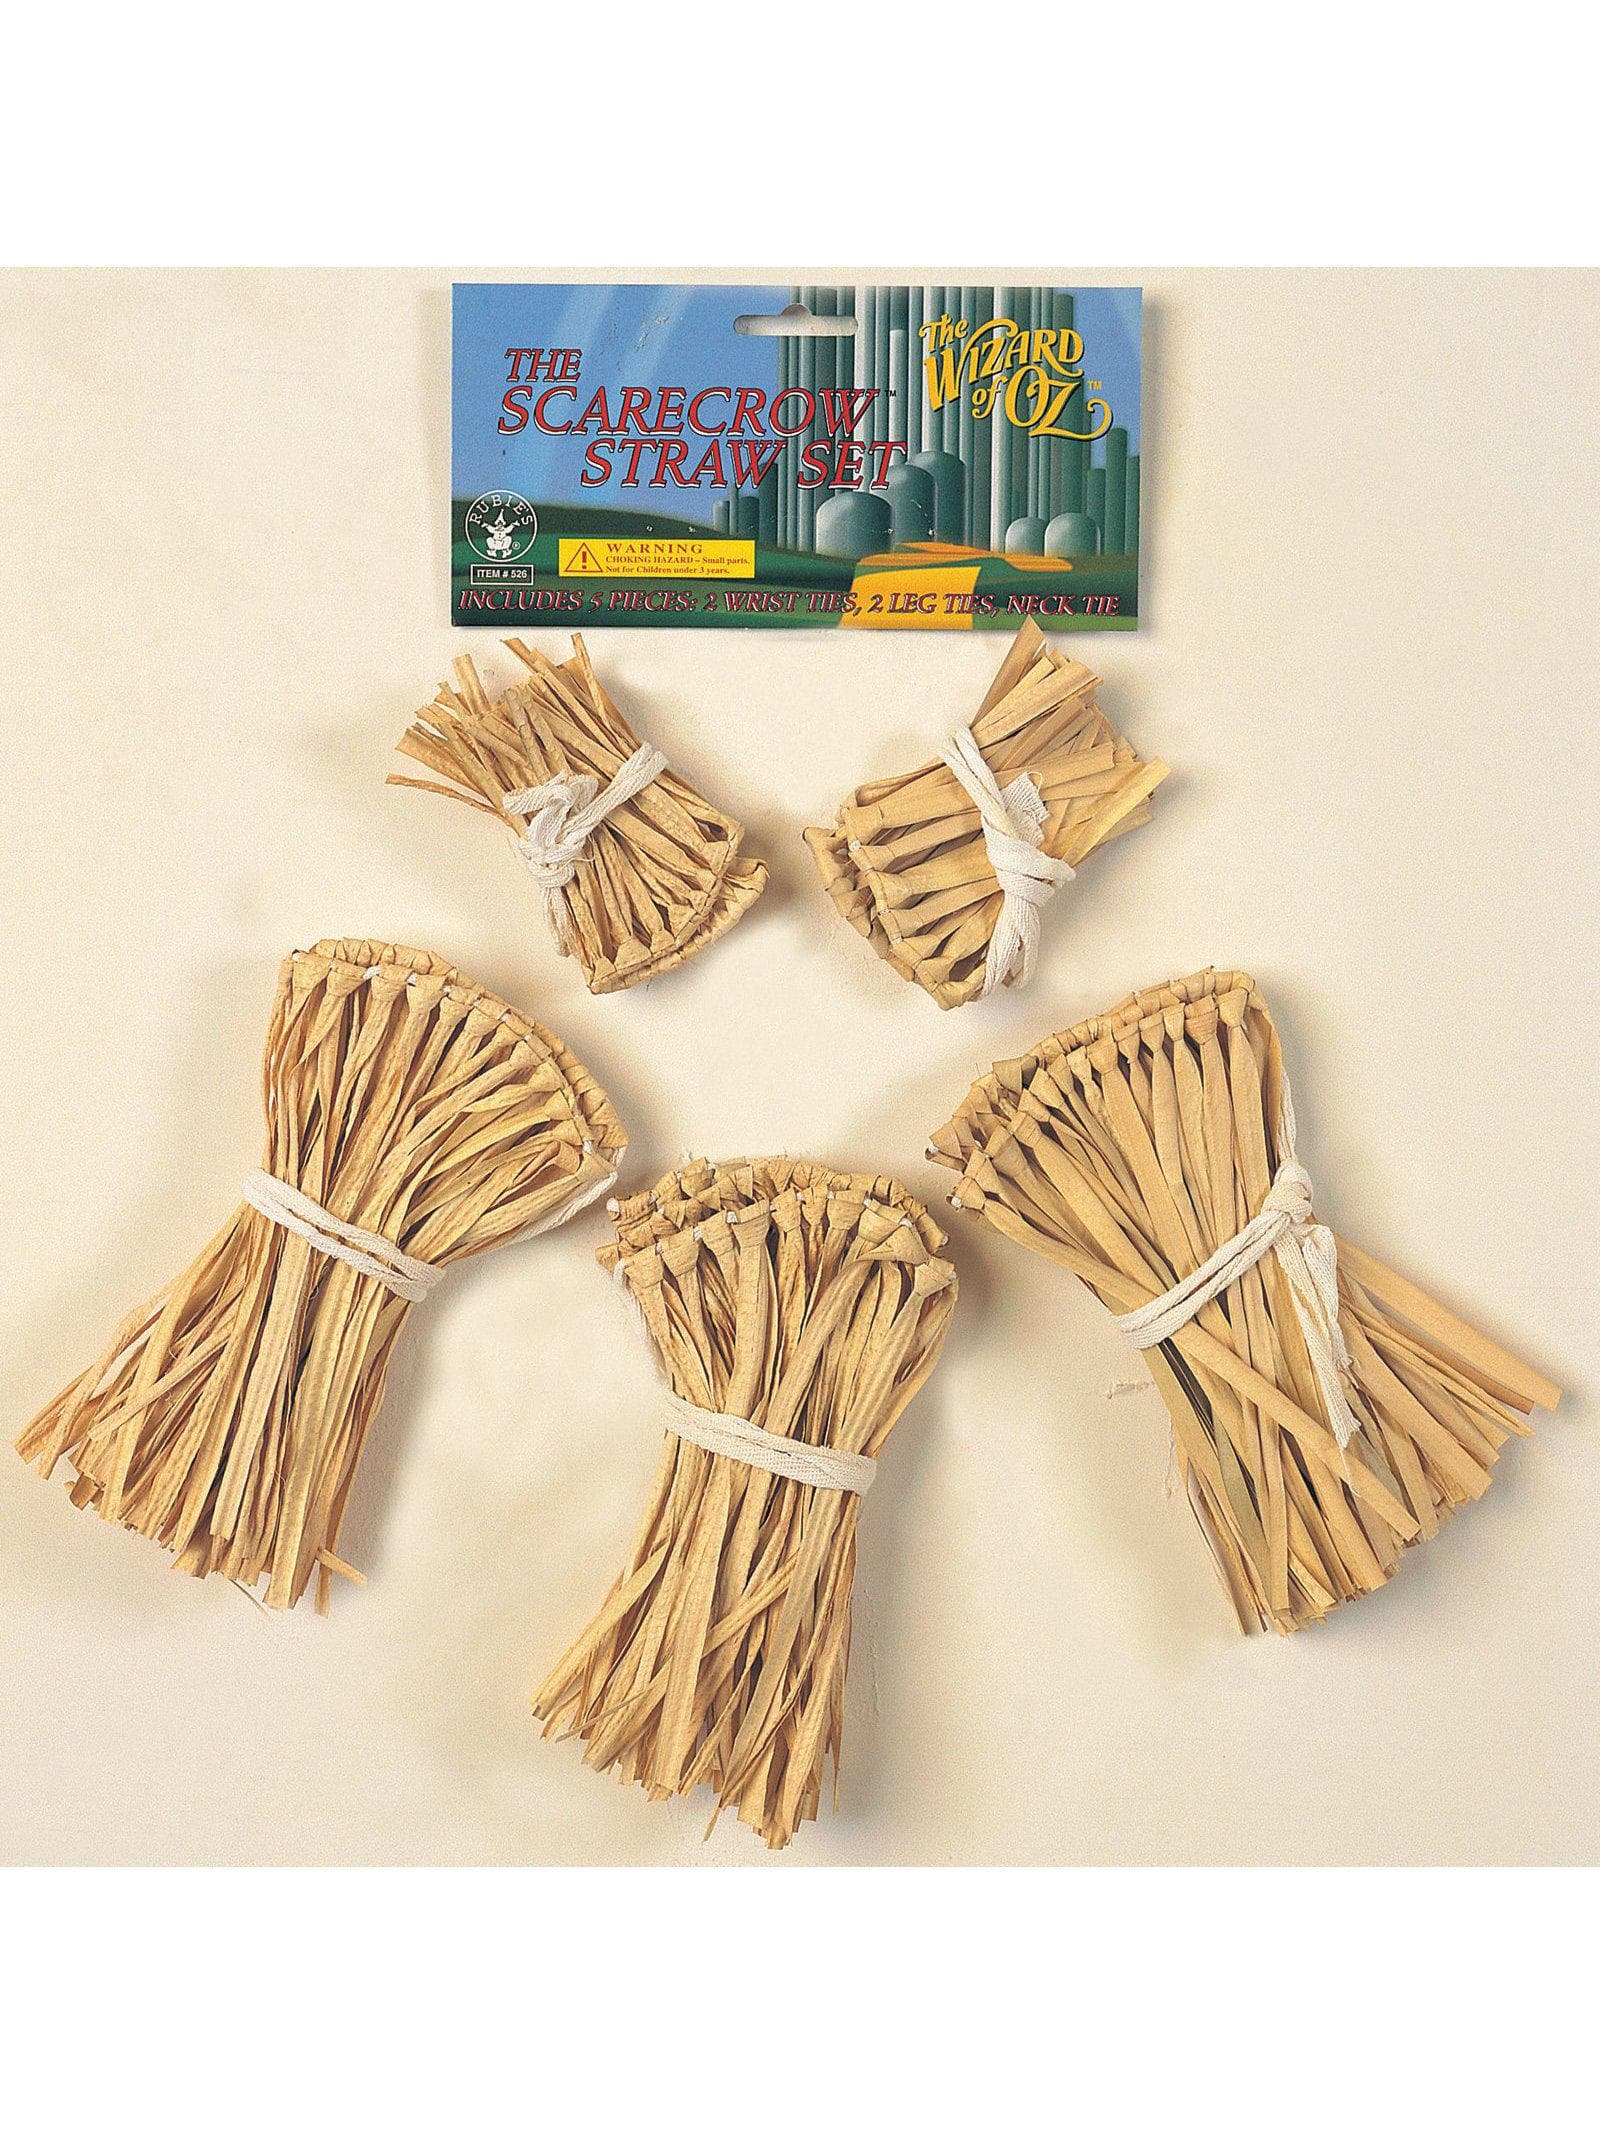 Adult Wizard of Oz Scarecrow Straw Accessory Set - costumes.com